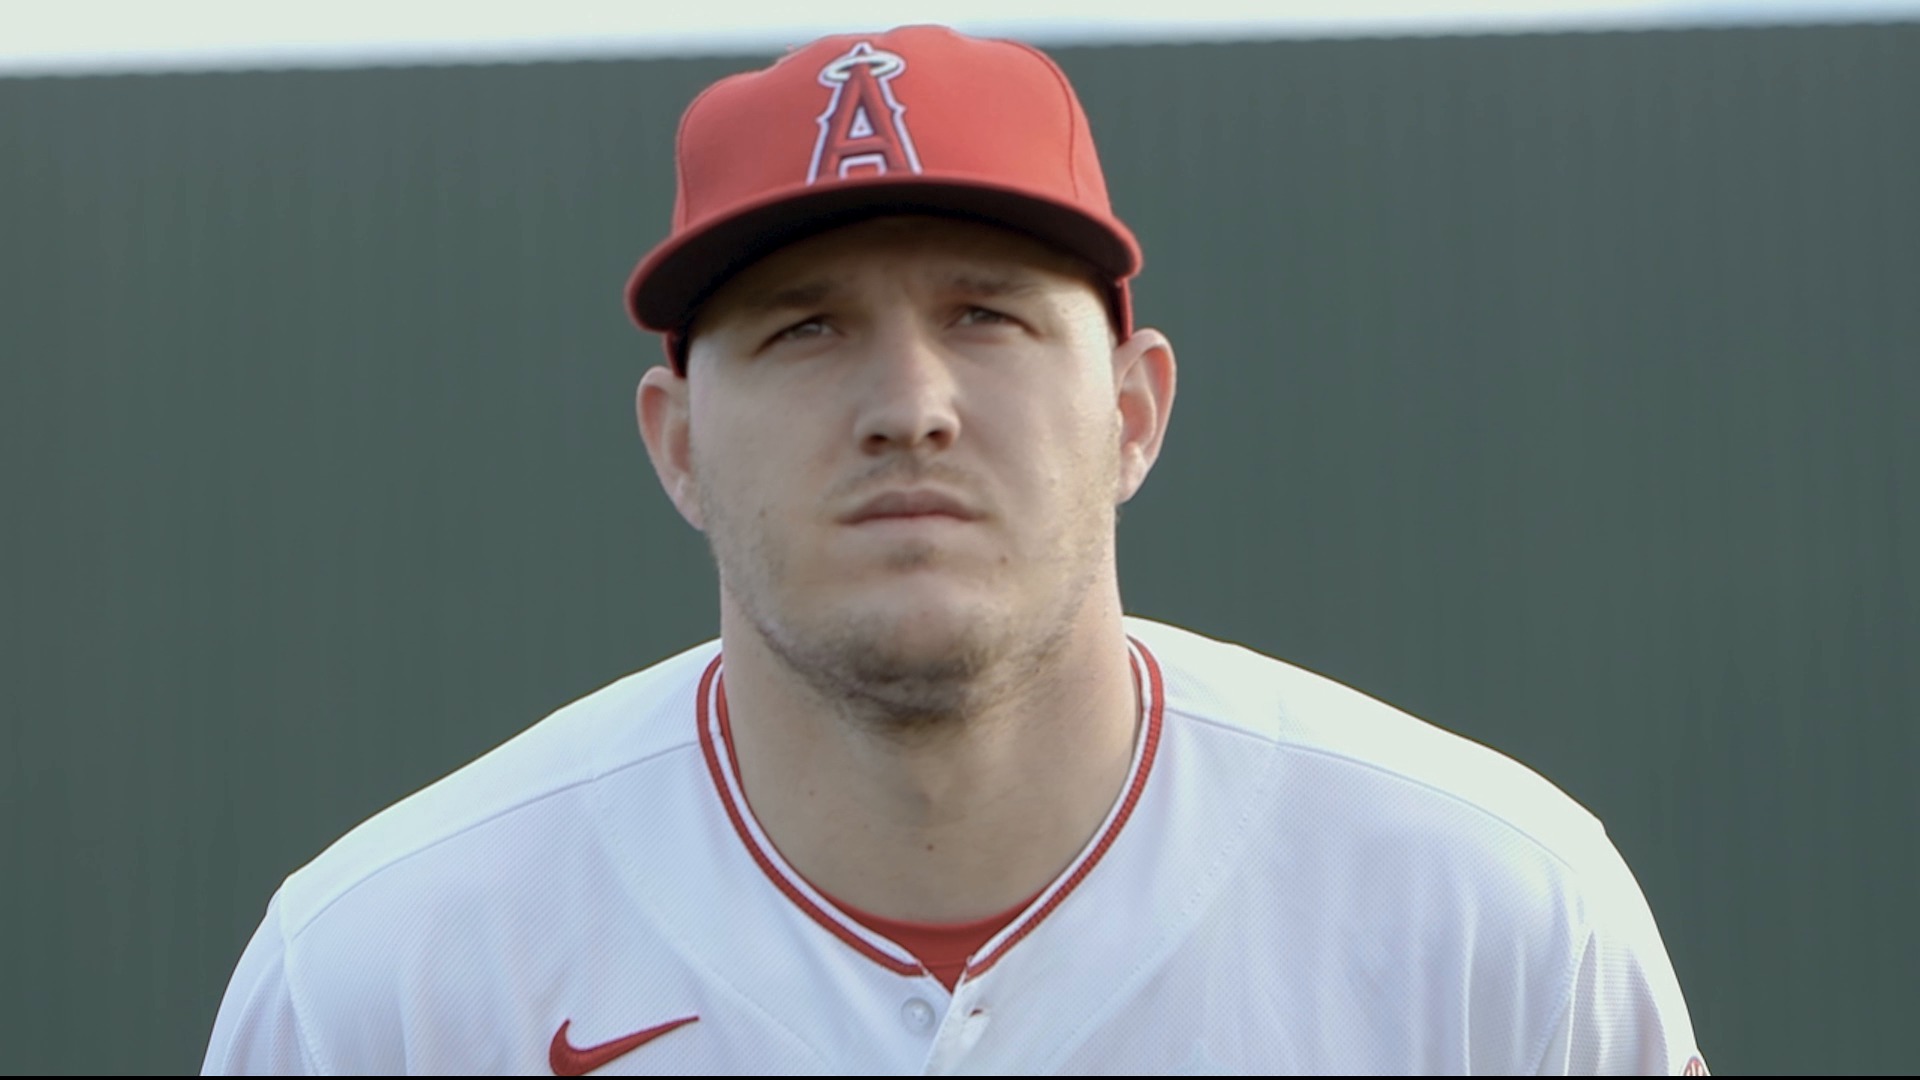 Mike Trout visits New Jersey family after they lost home in a